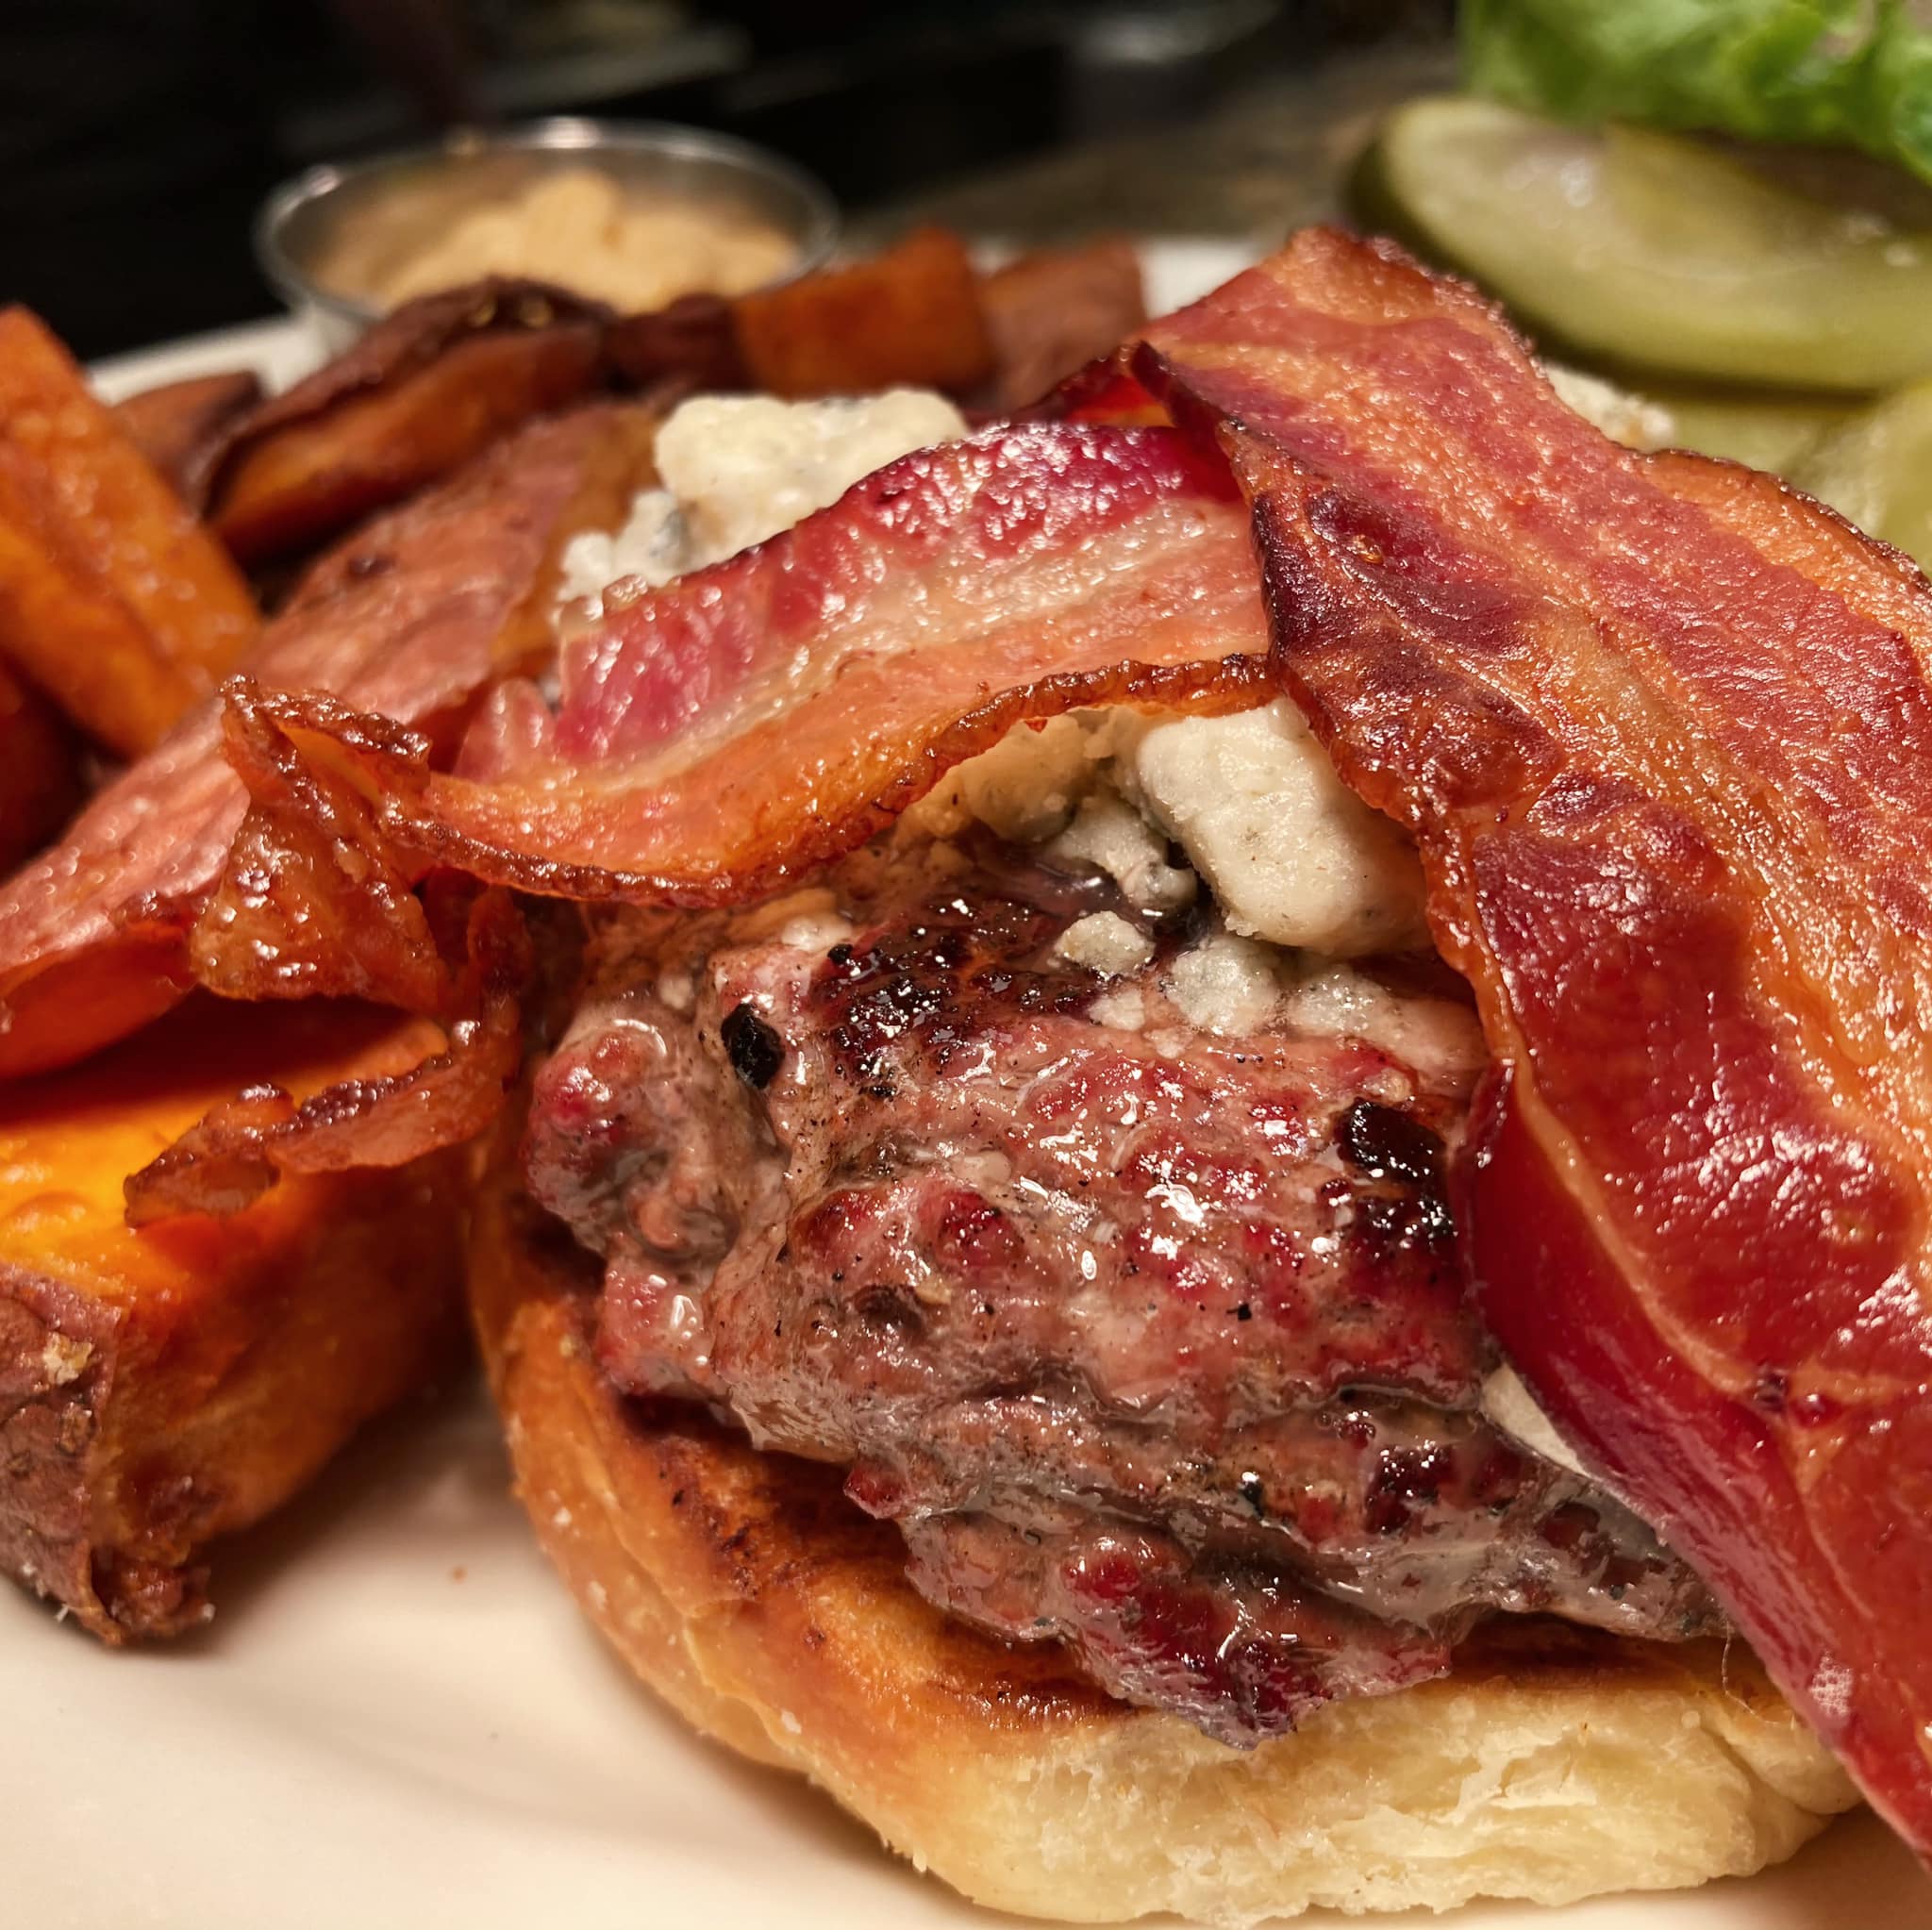 A Roadhouse burger with cheese and bacon.